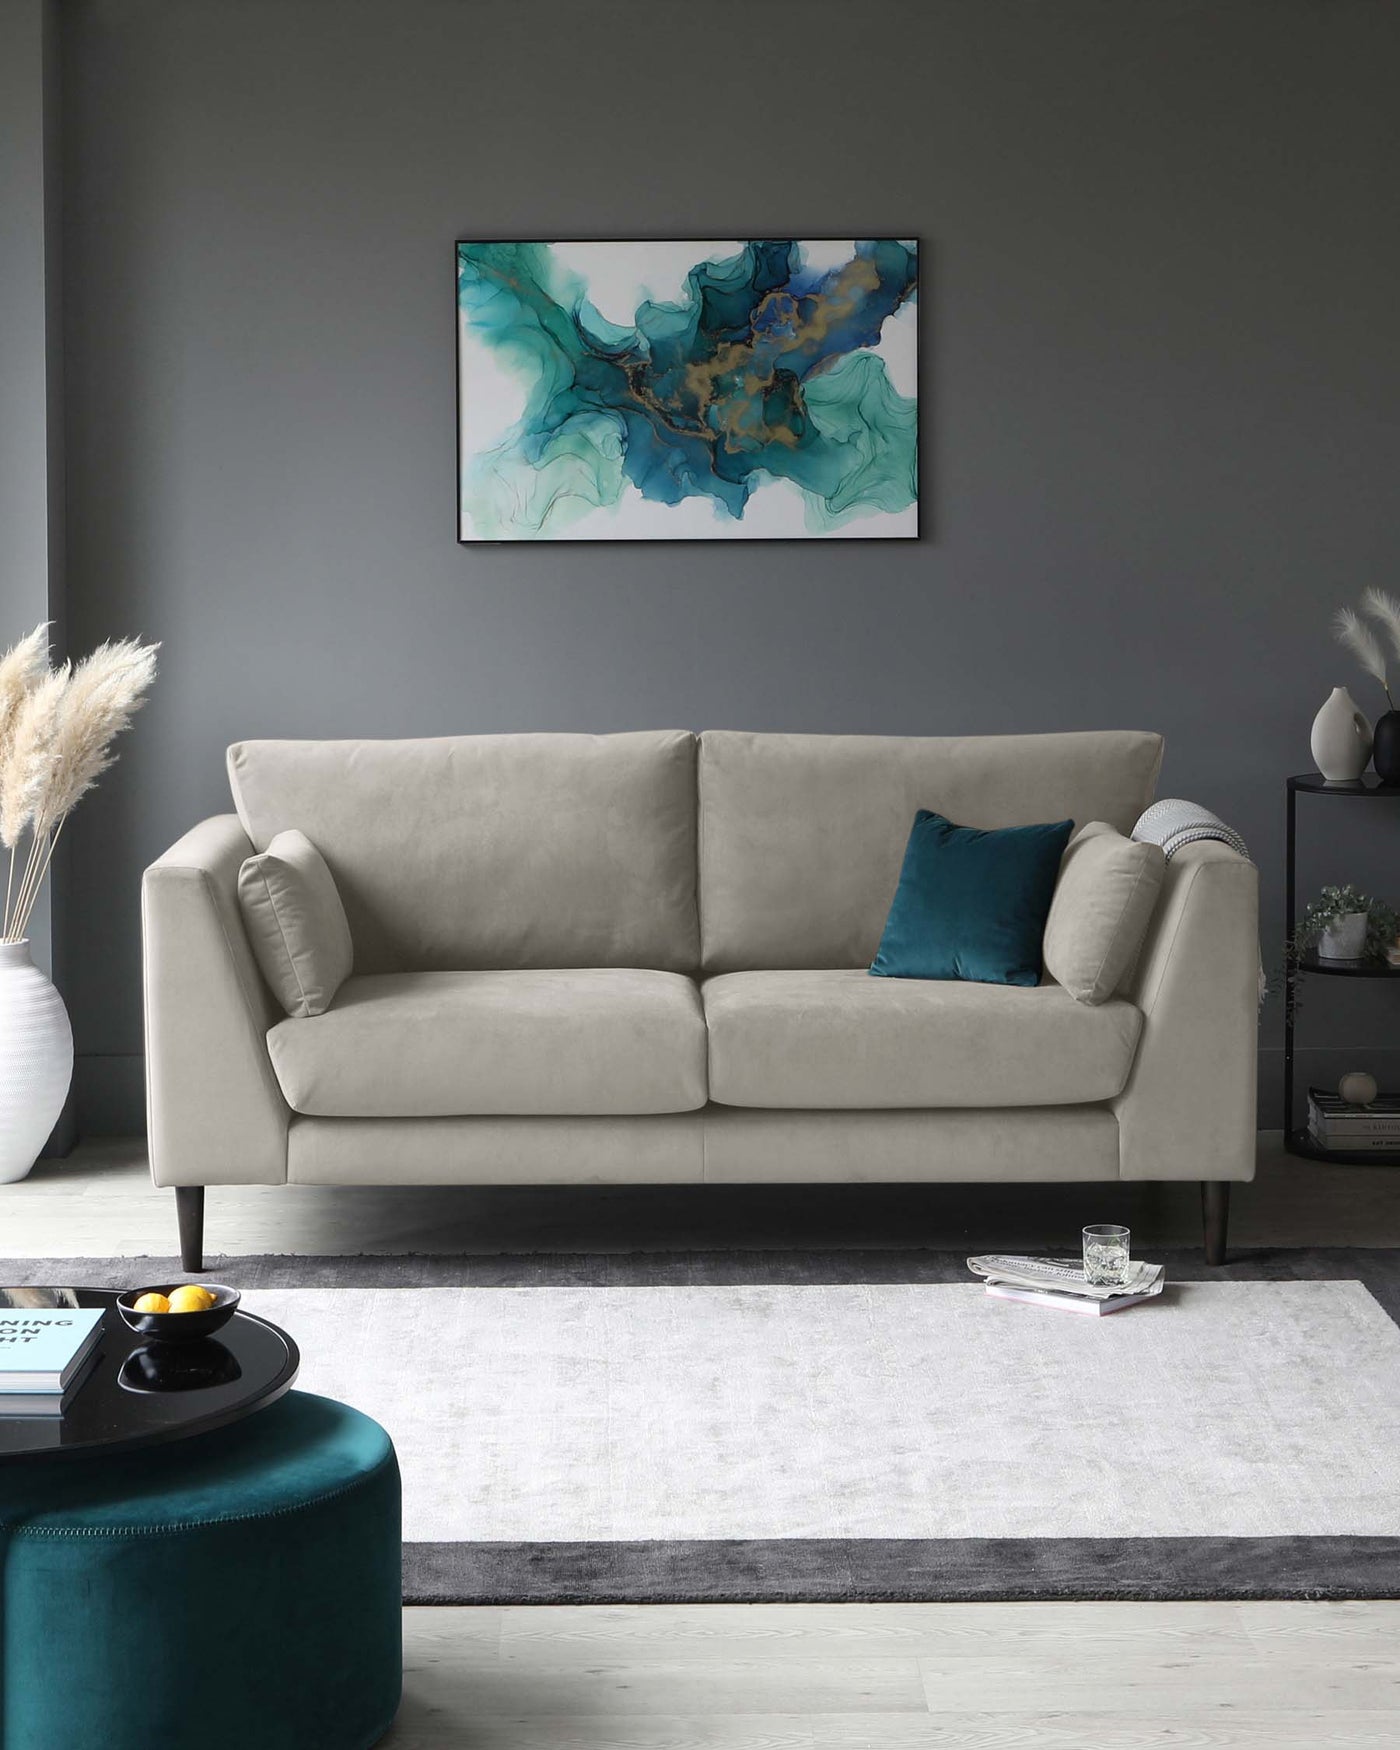 Elegant three-seater sofa with plush light grey upholstery and gentle curvature on the armrests. The sofa is accessorized with a contrasting teal throw pillow and rests on a sleek, low-profile base. In the foreground, a contemporary round ottoman with velvet teal fabric serves as a multifunctional piece, which could be used as a seat, footrest, or a table with a serving tray atop. A textured off-white area rug with a dark border underpins the furniture arrangement on a light wooden floor.